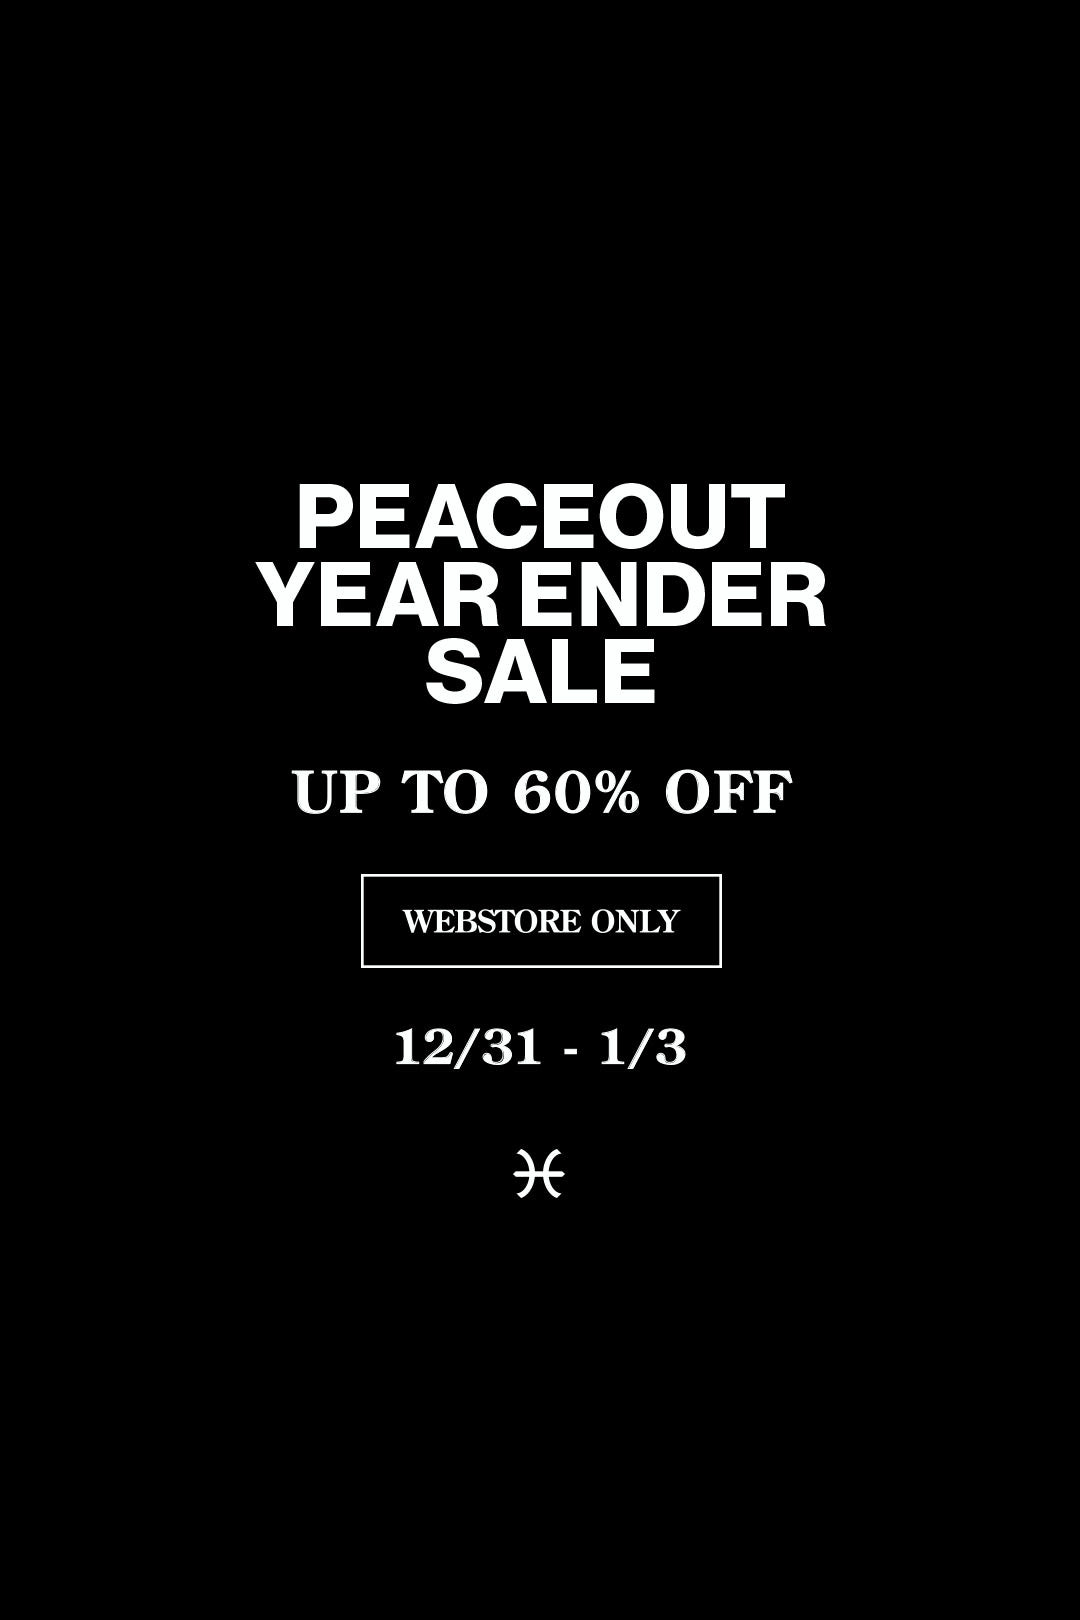 Peaceout Year Ender Sale